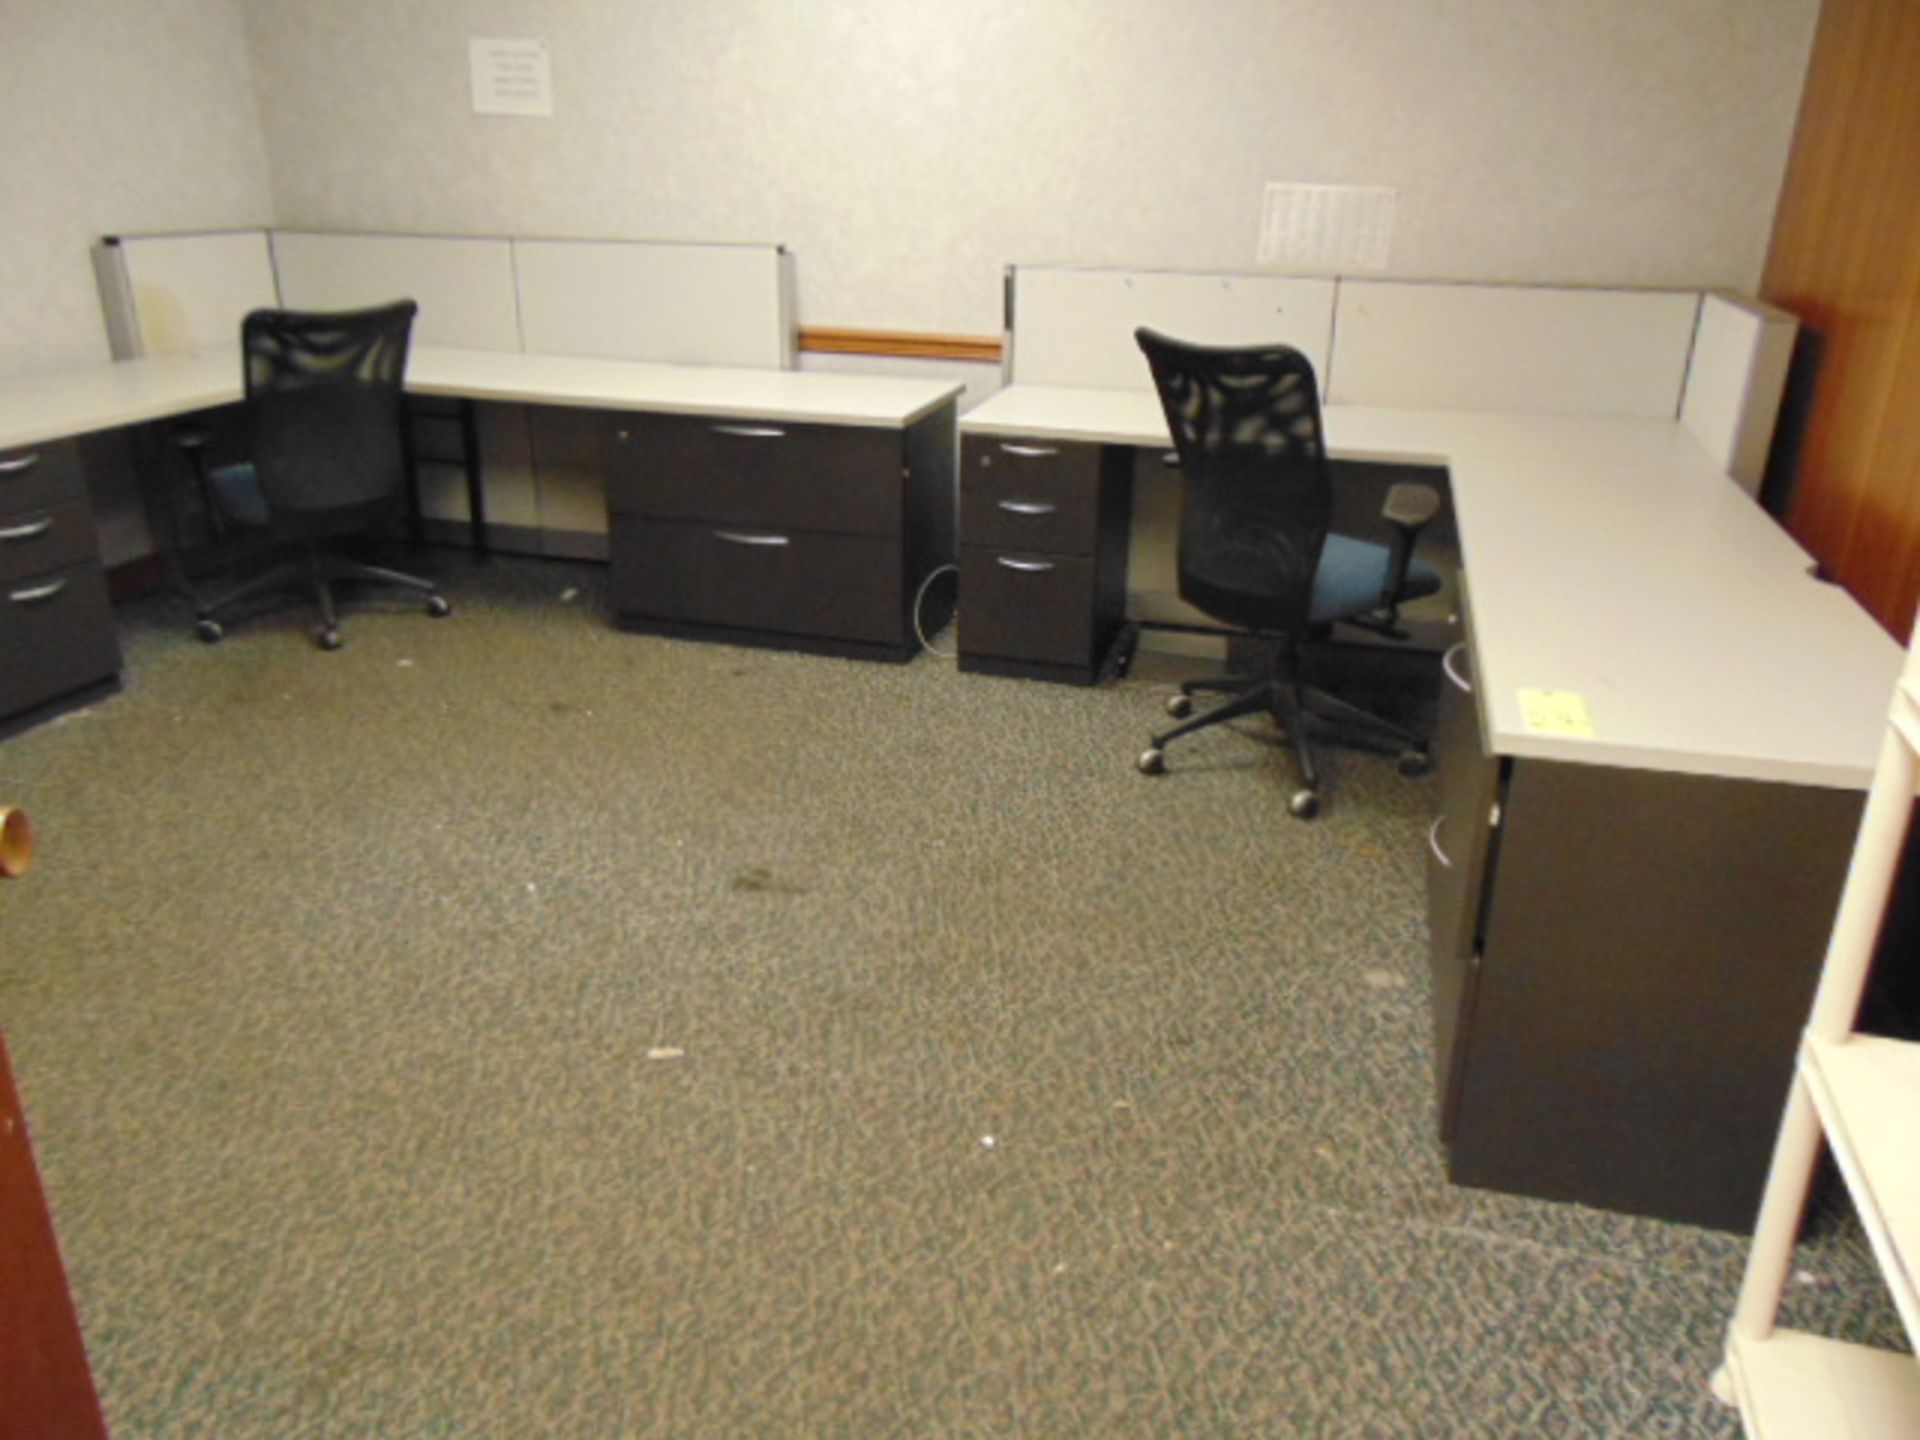 LOT OF CUBICAL FURNITURE (in one room)